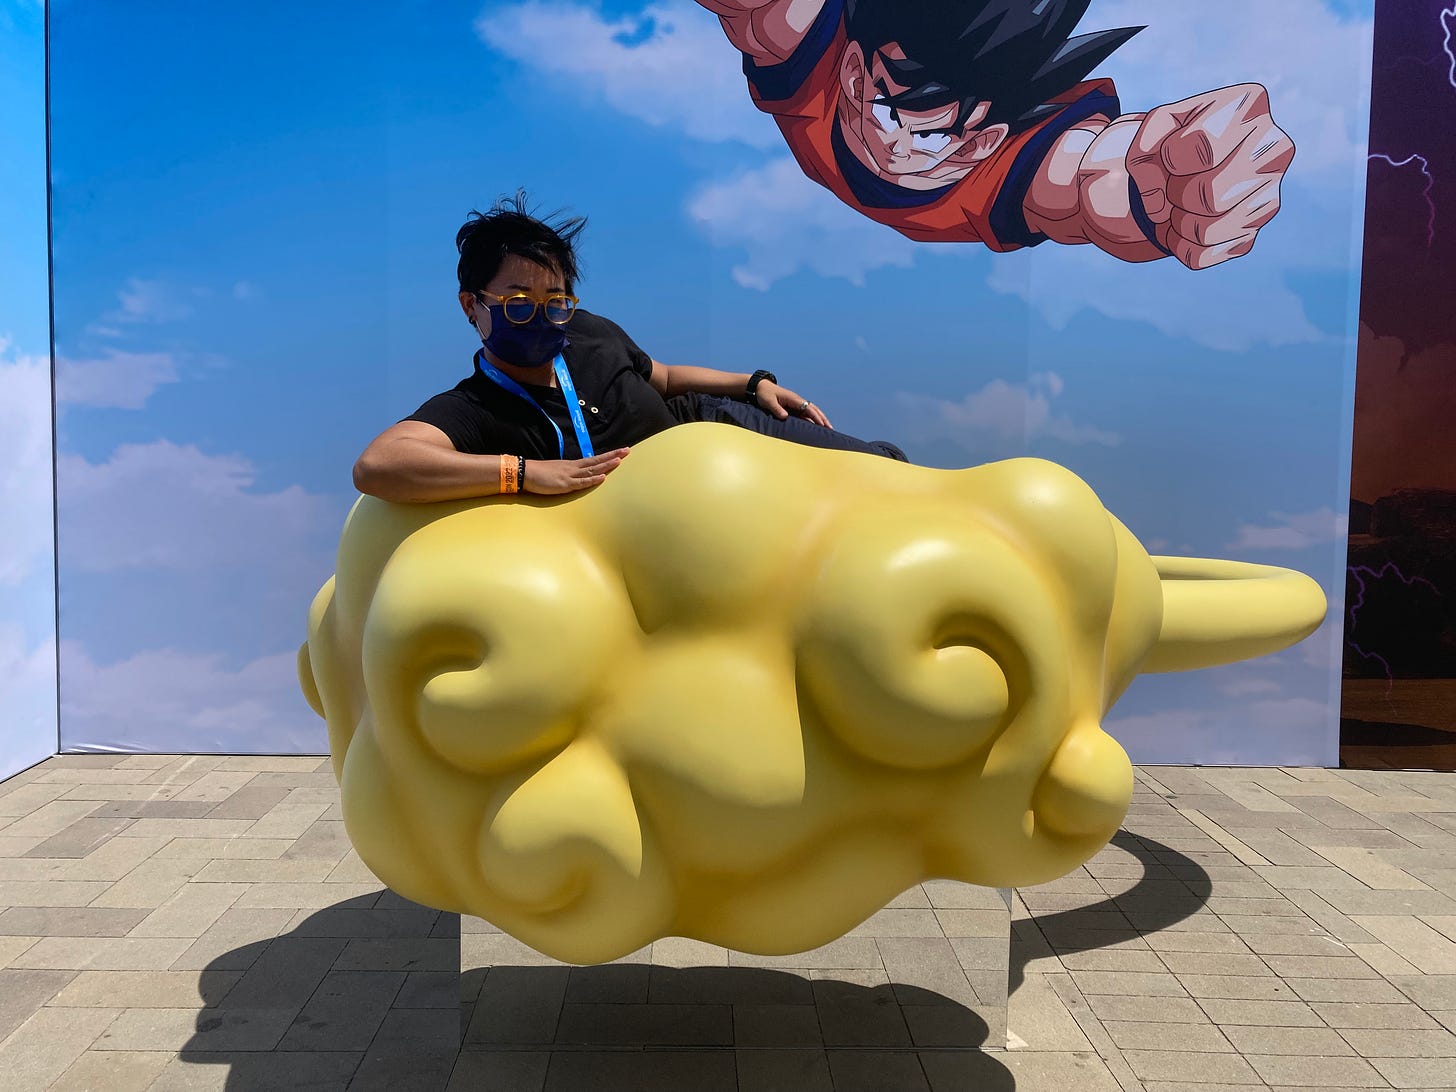 Me on Kintoun at the popup DBZ Super exhibit outside the hall. My eyes were burning.